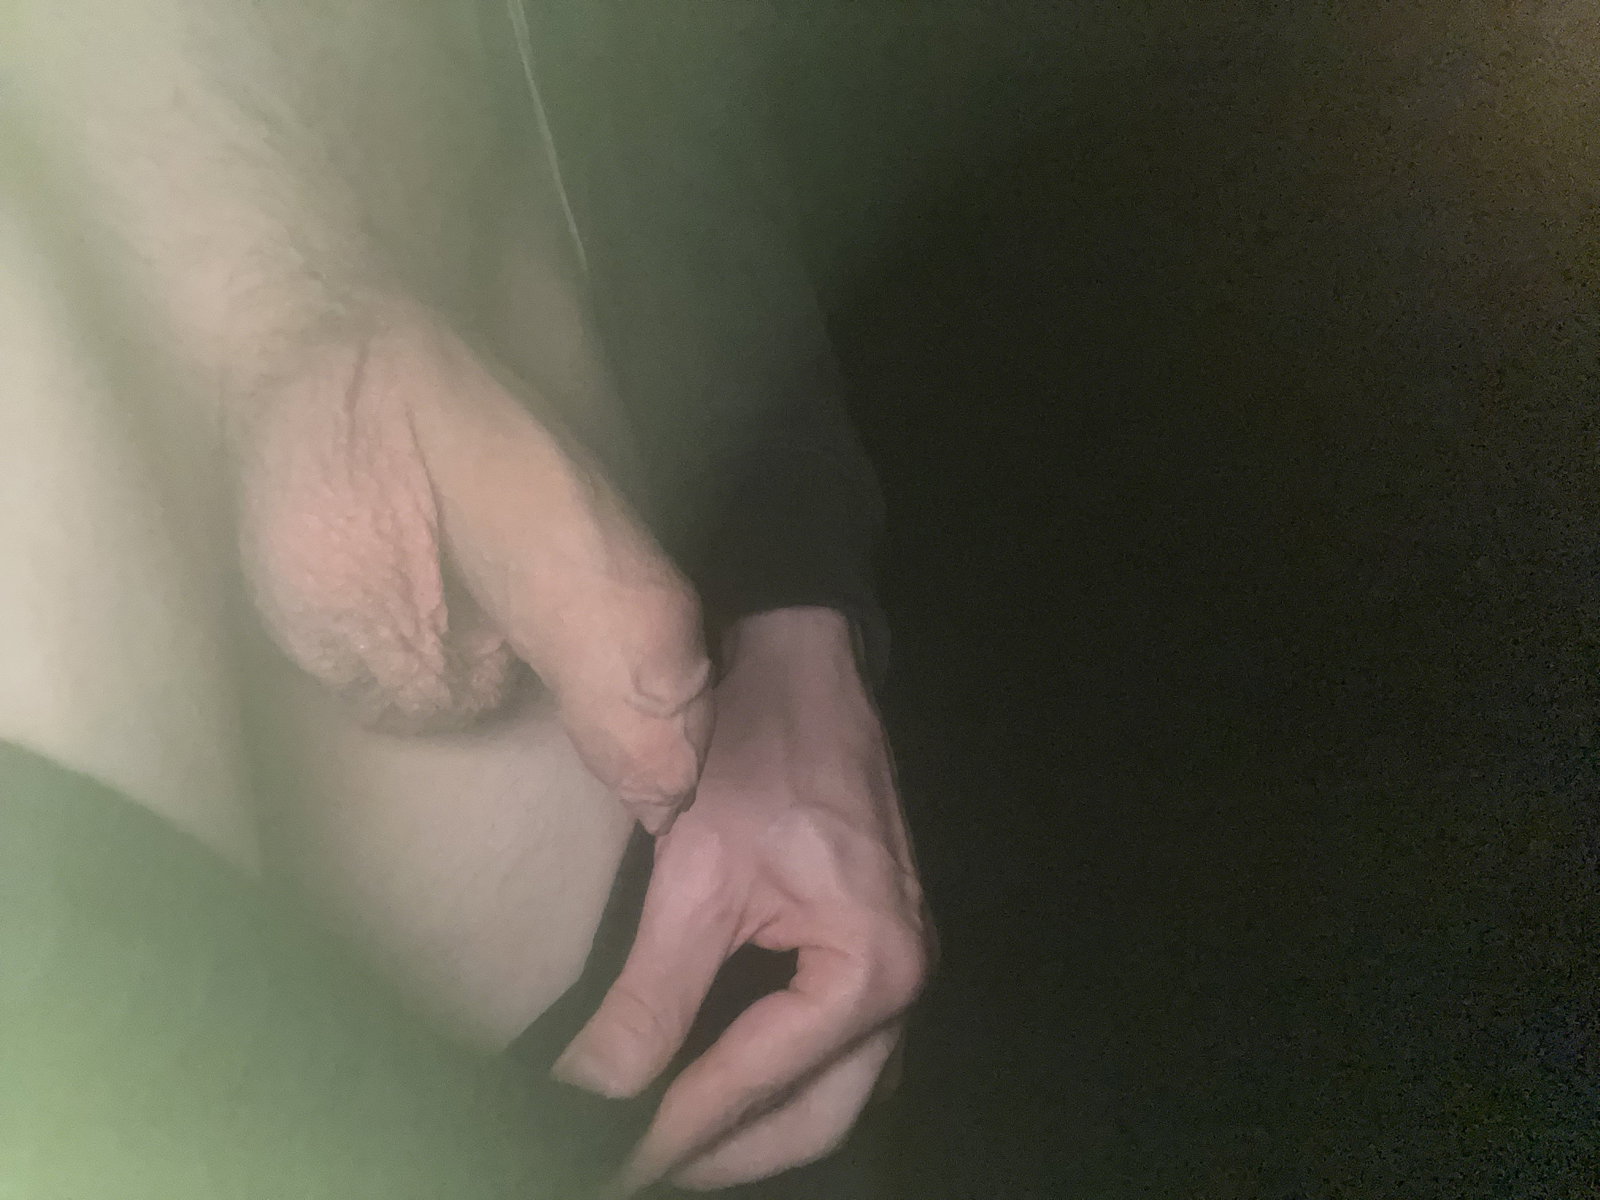 Watch the Photo by AdmiredSAM with the username @AdmiredSAM, posted on April 19, 2023. The post is about the topic Rate my pussy or dick. and the text says 'whats the rating out of 1-10 ?'